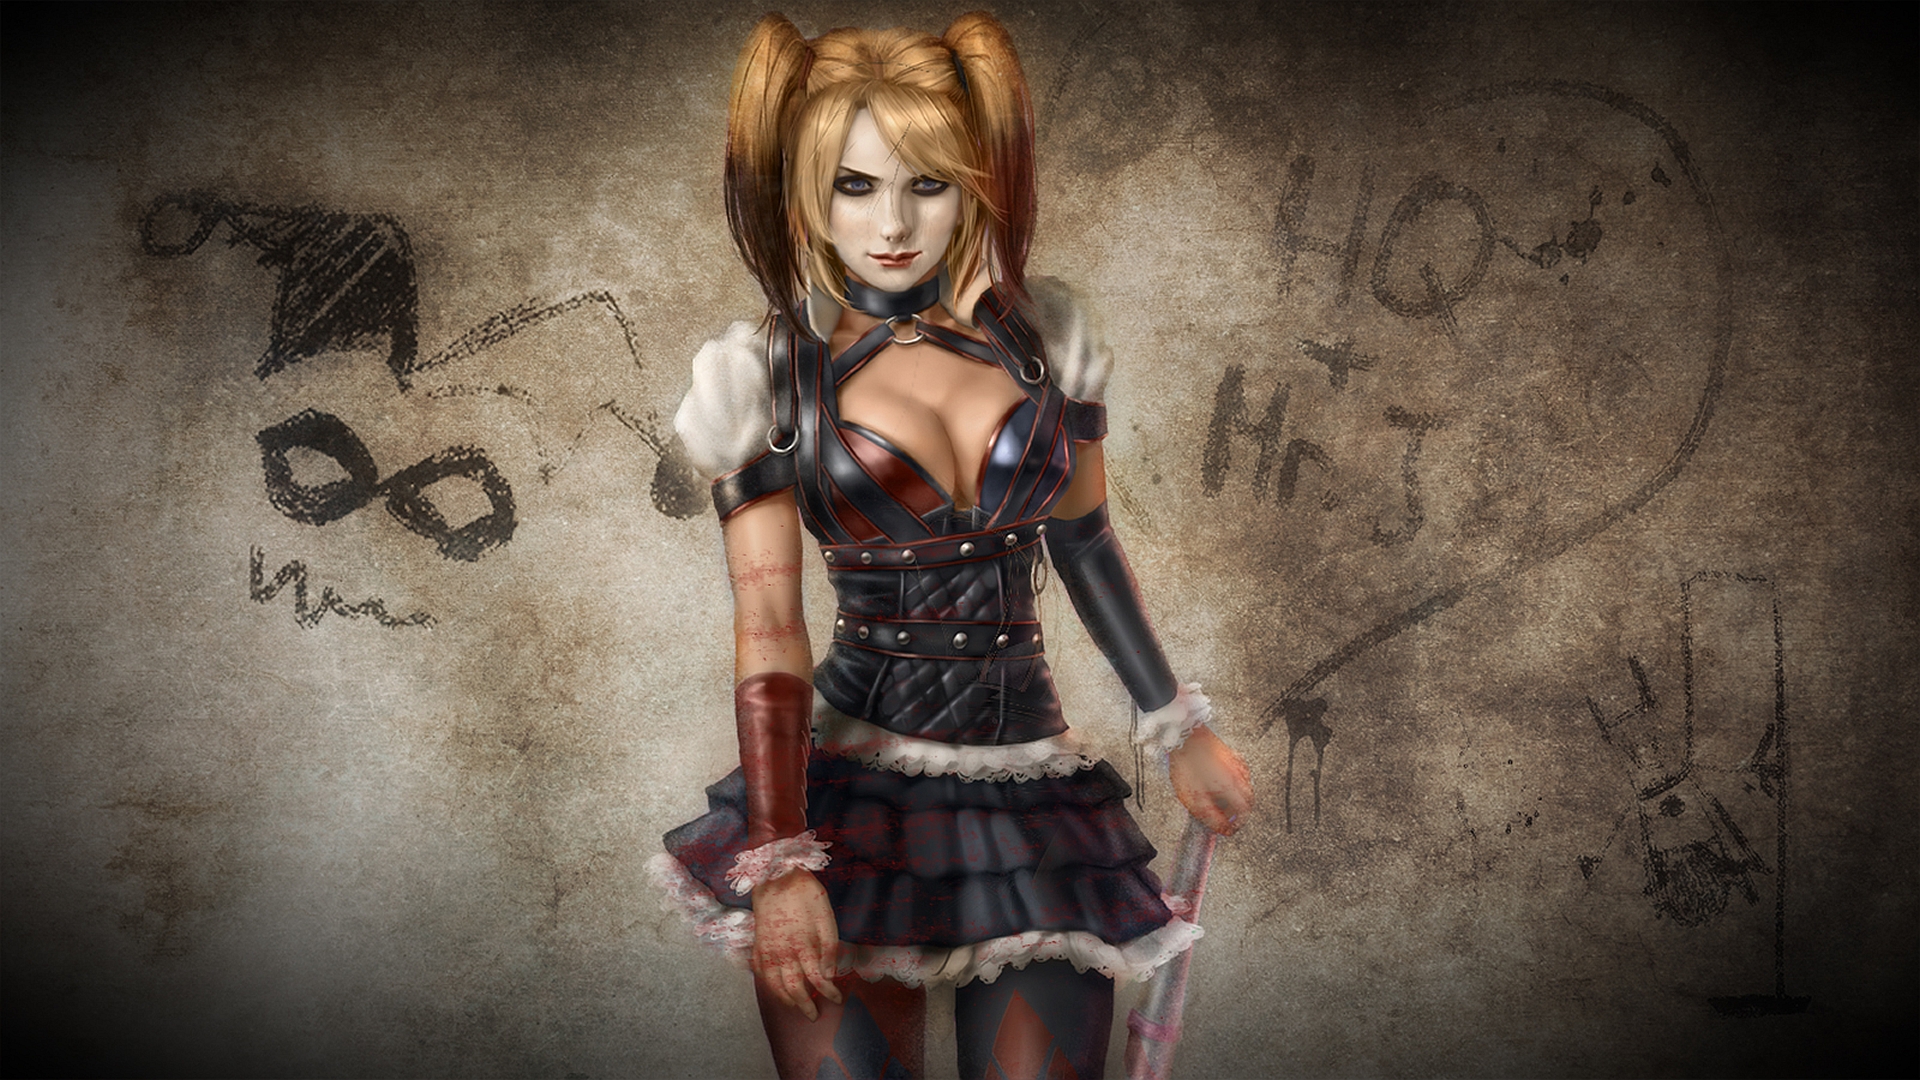 Harley Quinn Live Wallpaper  1920x1080  Rare Gallery HD Live Wallpapers